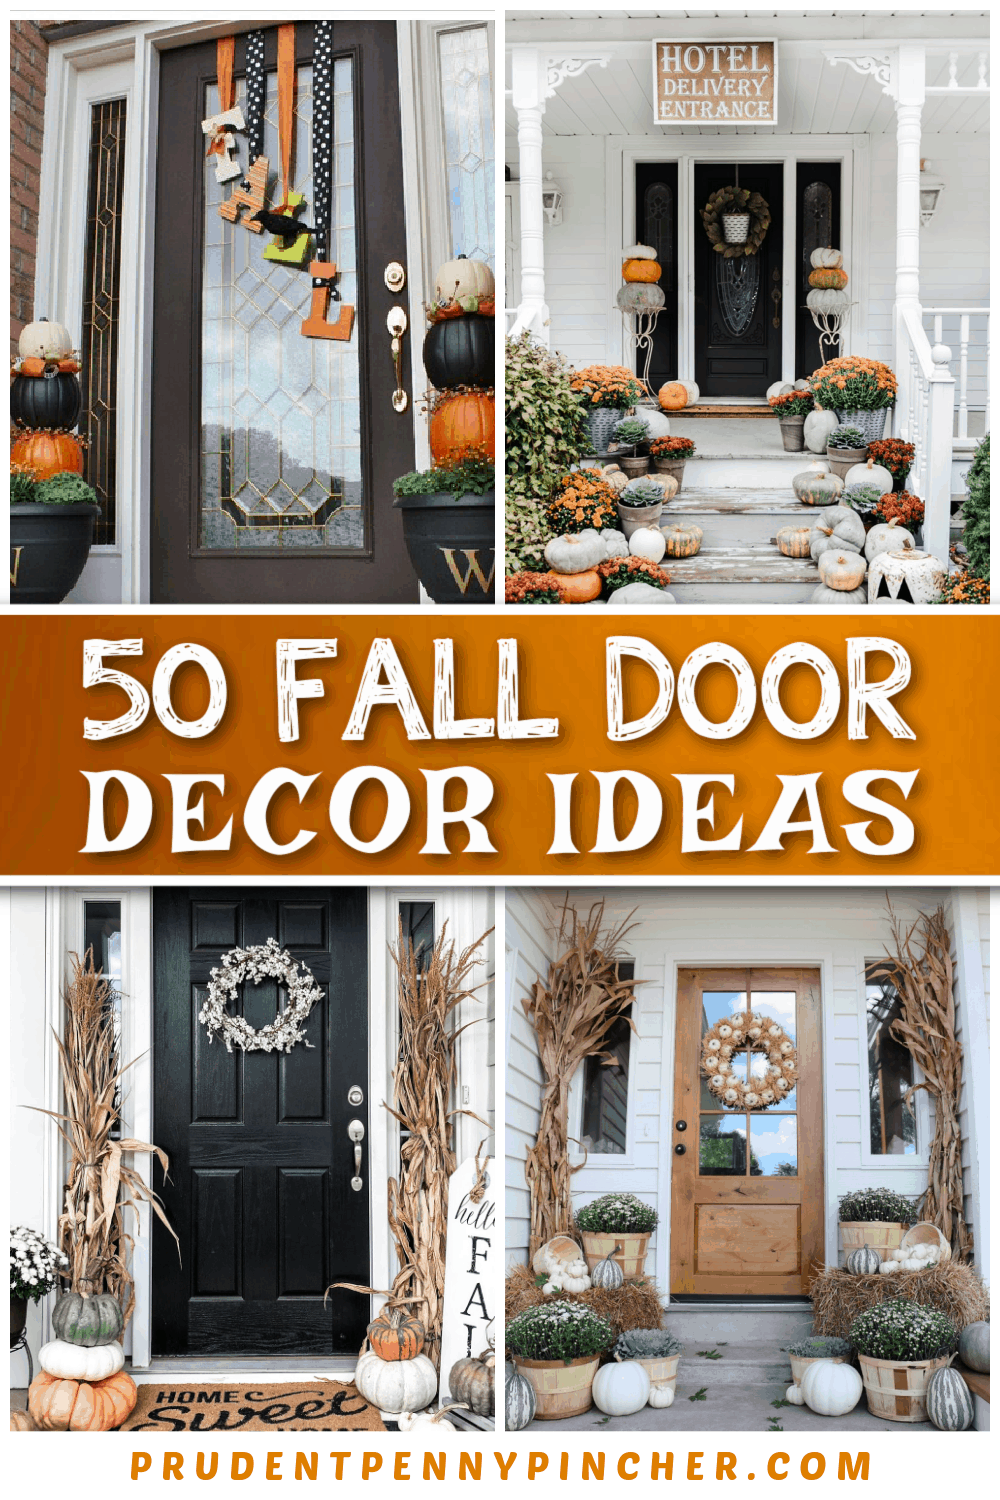 50 Fall Front Door Decor Ideas - Prudent Penny Pincher